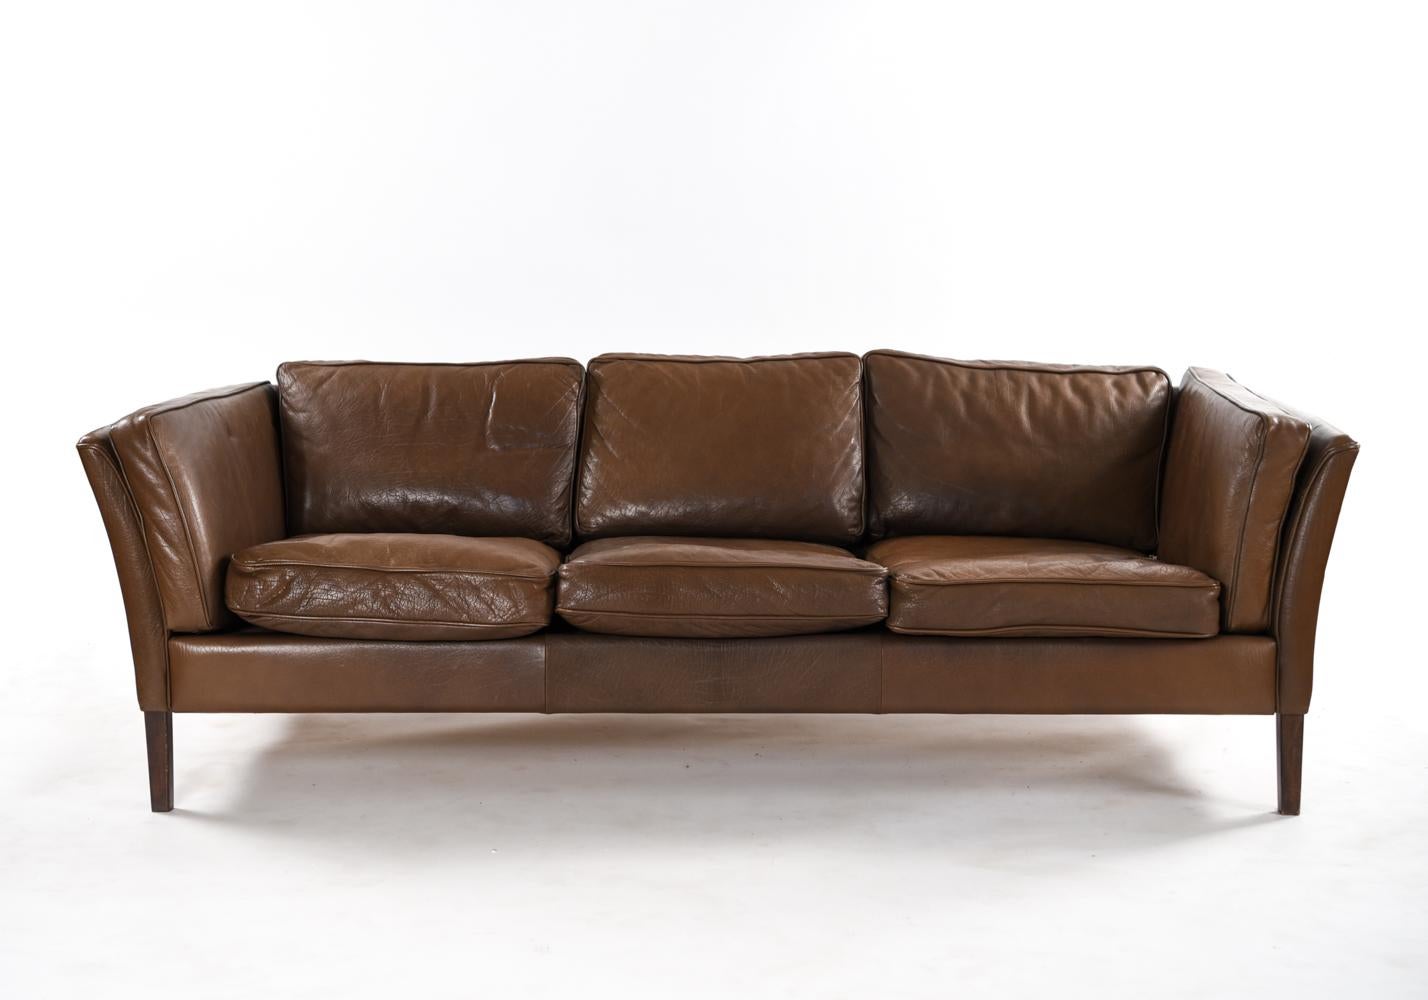 A Danish midcentury sofa that can seat three comfortably, upholstered in vintage brown leather with a lovely patination. This piece by Mogens Hansen shows clean, modern lines characteristic of Danish design.